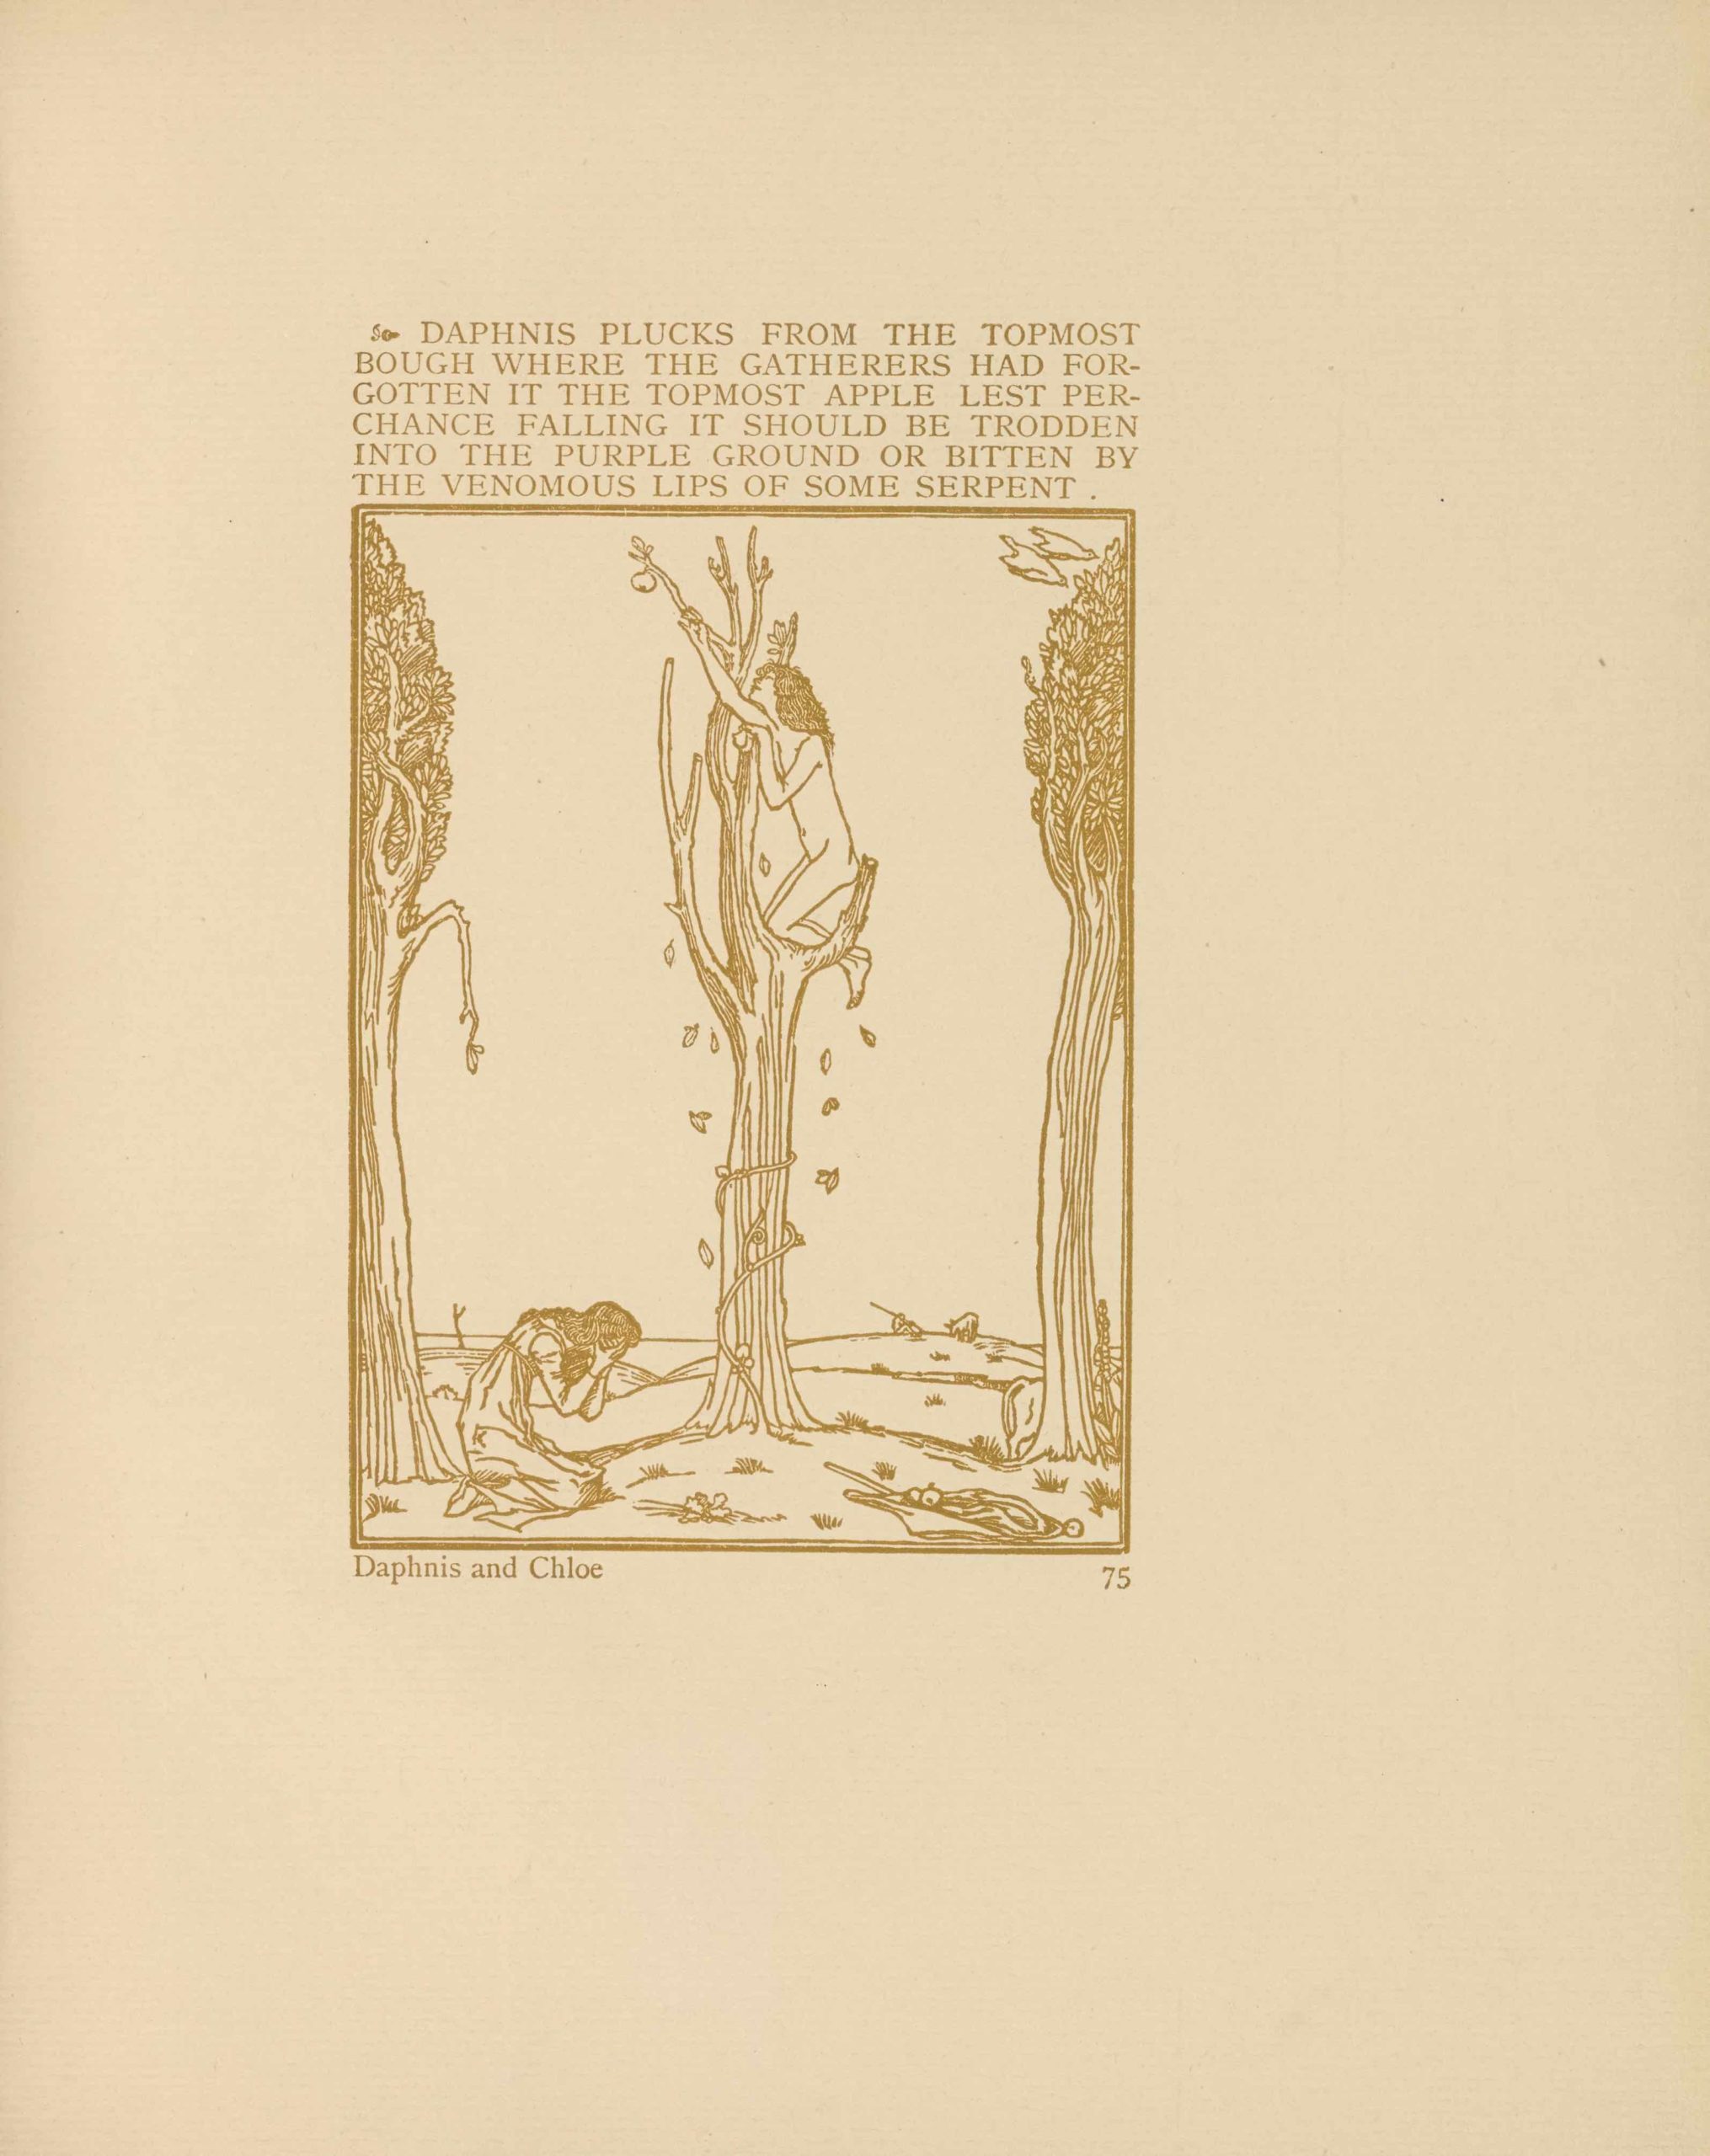 The wood engraving, an illustration of “Daphnis and Chloe,” is printed in golden brown ink within a 
                        portrait oriented rectangular double frame. Above the image, printed in the same ink, is typography in all 
                        caps, preceded by a fleuron: “Daphnis plucks from the topmost bough where the gatherers had forgotten it the 
                        topmost apple lest perchance falling it should be trodden into the purpose ground or bitten by the venomous 
                        lips of some serpent.” The typography is the same width as the image, beneath which is printed the title 
                        “Daphnis and Chloe” and the page number 75. Centred in the image is a barren tree in which Daphnis, perched 
                        on a high branch, reaches out for an apple while Chloe kneels at the base of the tree. Daphnis is nude, with 
                        long hair that cascades over his shoulder. From the ground, a single vine grows upward and is wrapped around 
                        the tree. Chloe kneels to the left of the tree, holding her face in her hands. She wears a long dress and shoes. 
                        In the far right foreground is a crumpled basket or cloth holding apples. Two blooming trees with leafy foliage 
                        frame either side of the central tree. An animal is half-hidden behind the right tree, with its rear visible. 
                        In the distant background are hills, with a shepherd and sheep in the distance. At the top of the image, two 
                        white birds, possibly doves, fly down towards the tree at the right.